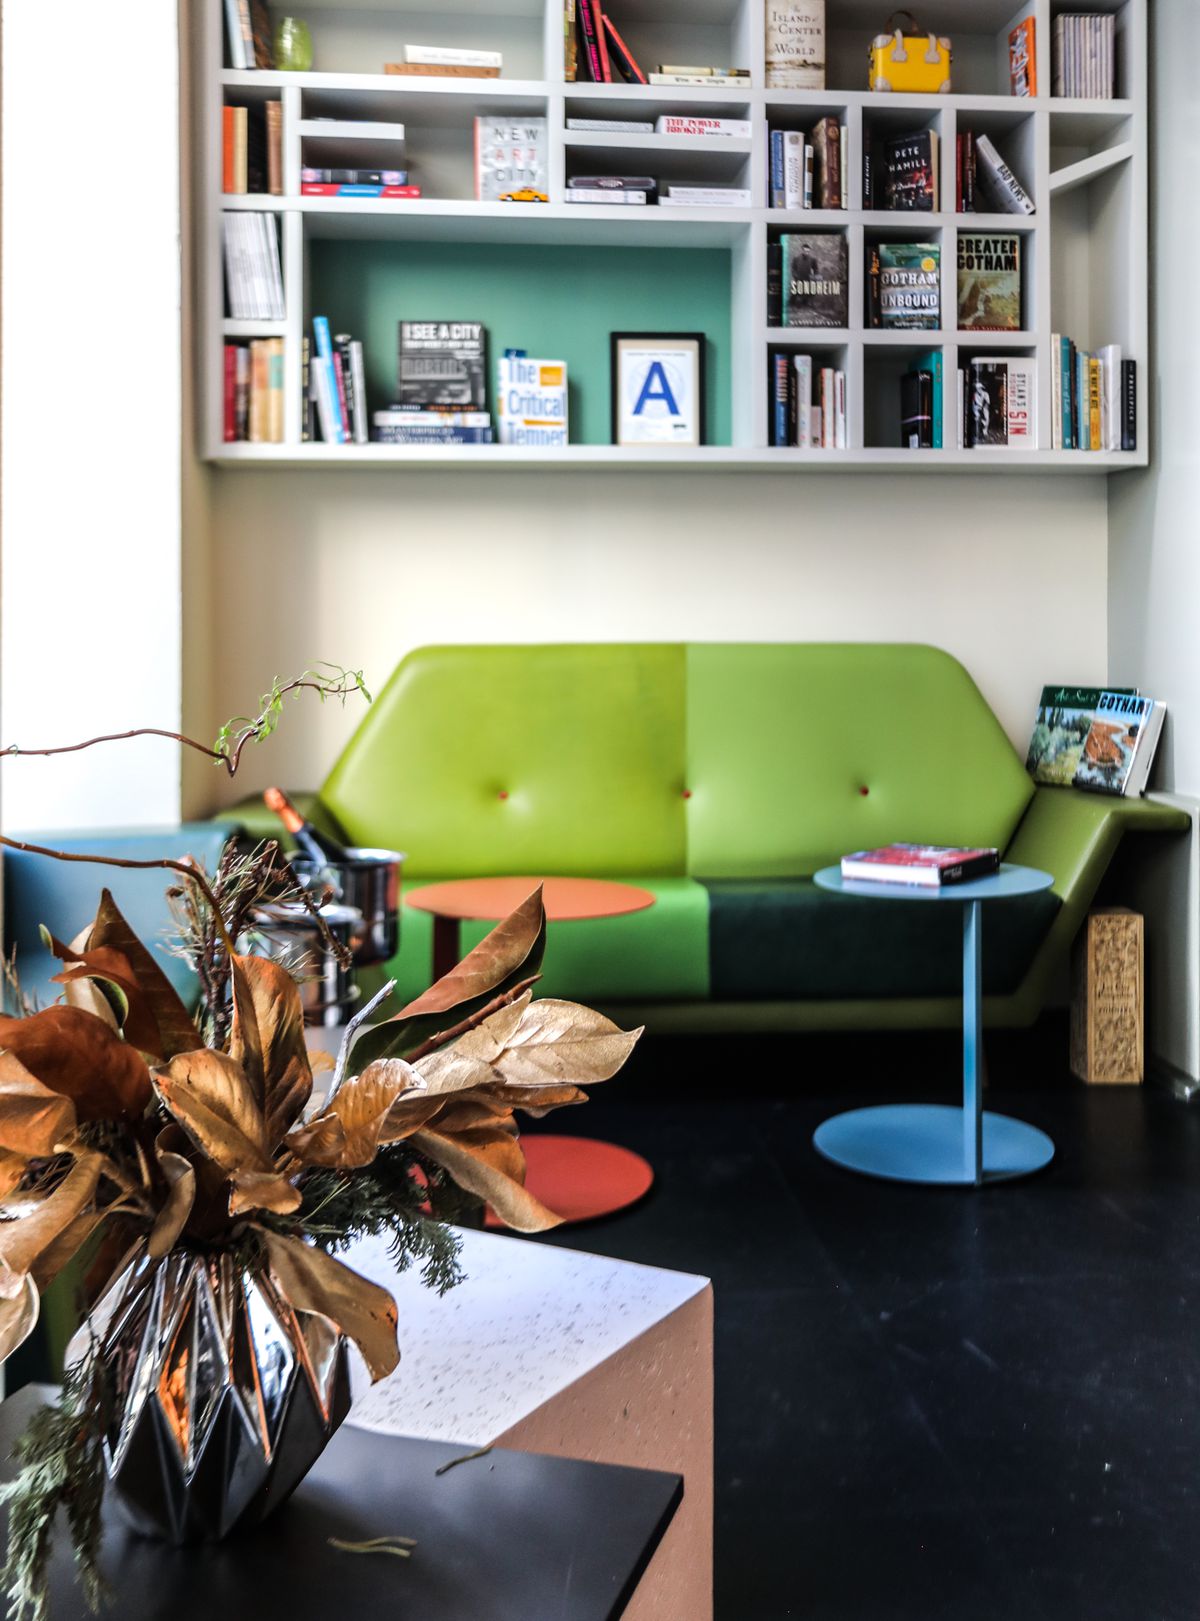 A library above a green loveseat.